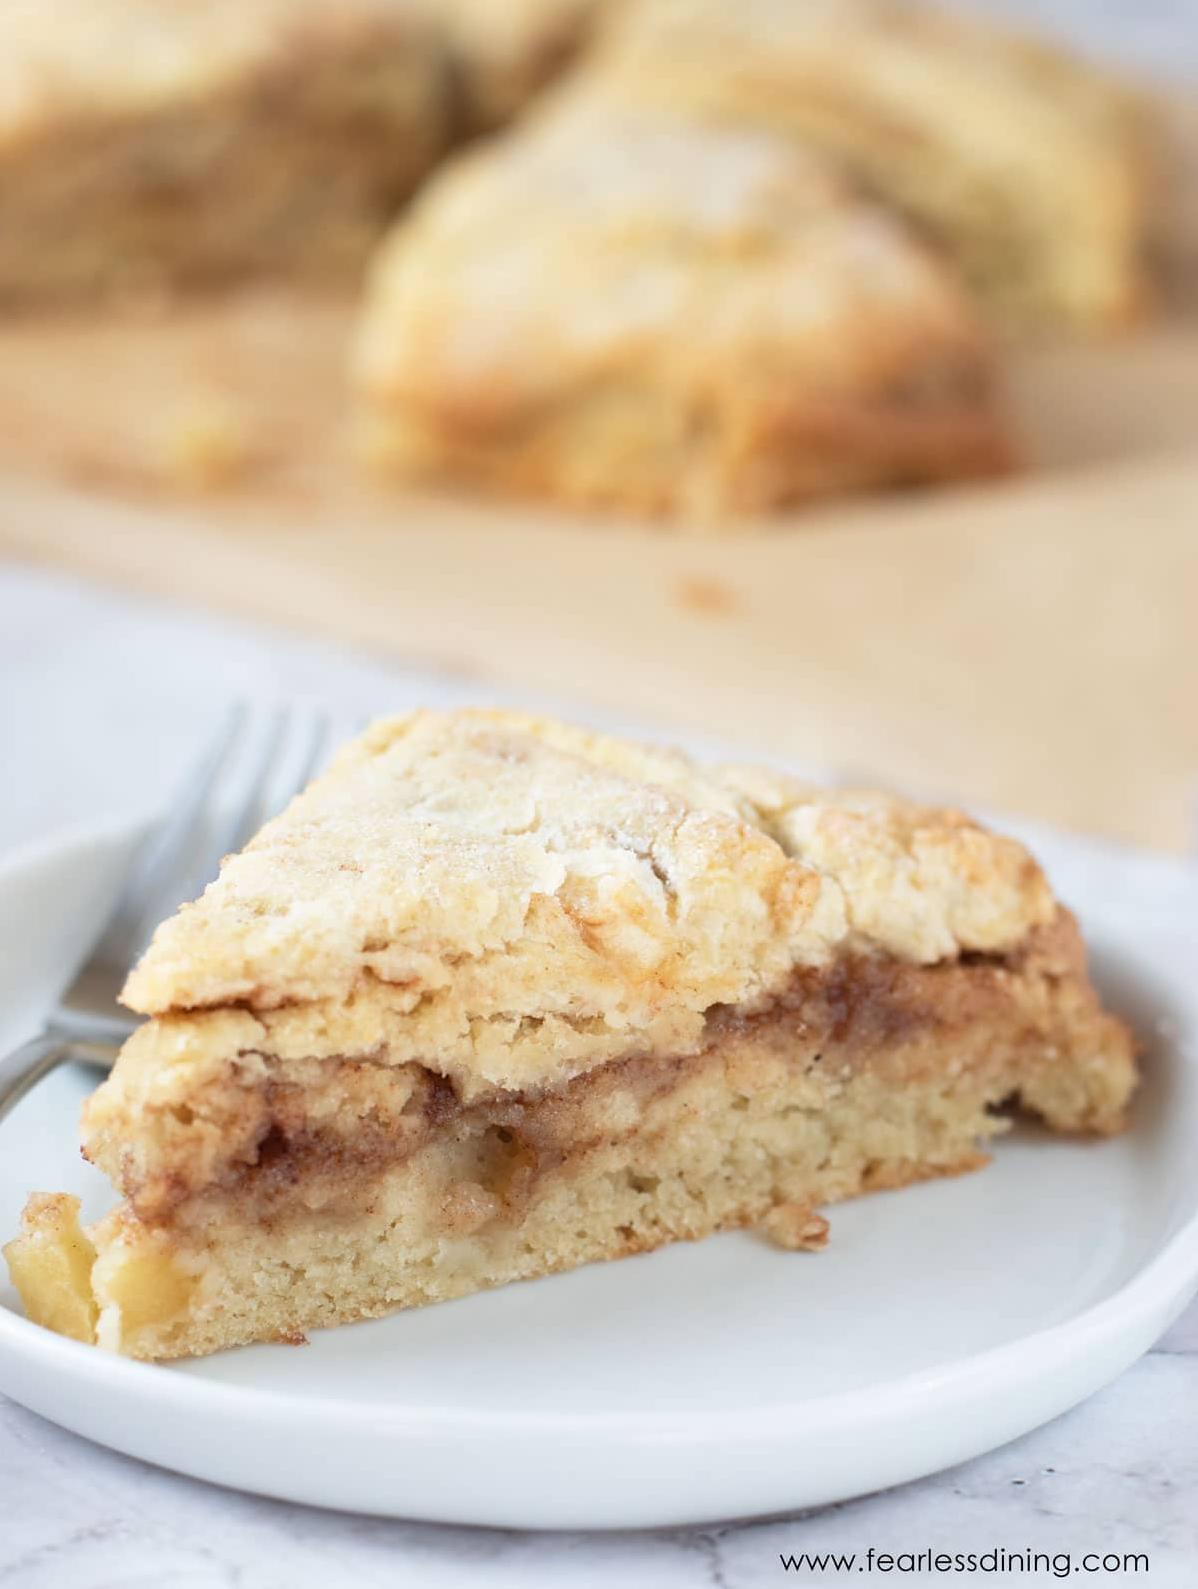  An inside look at the delectable combination of cinnamon and juicy apples baked to perfection